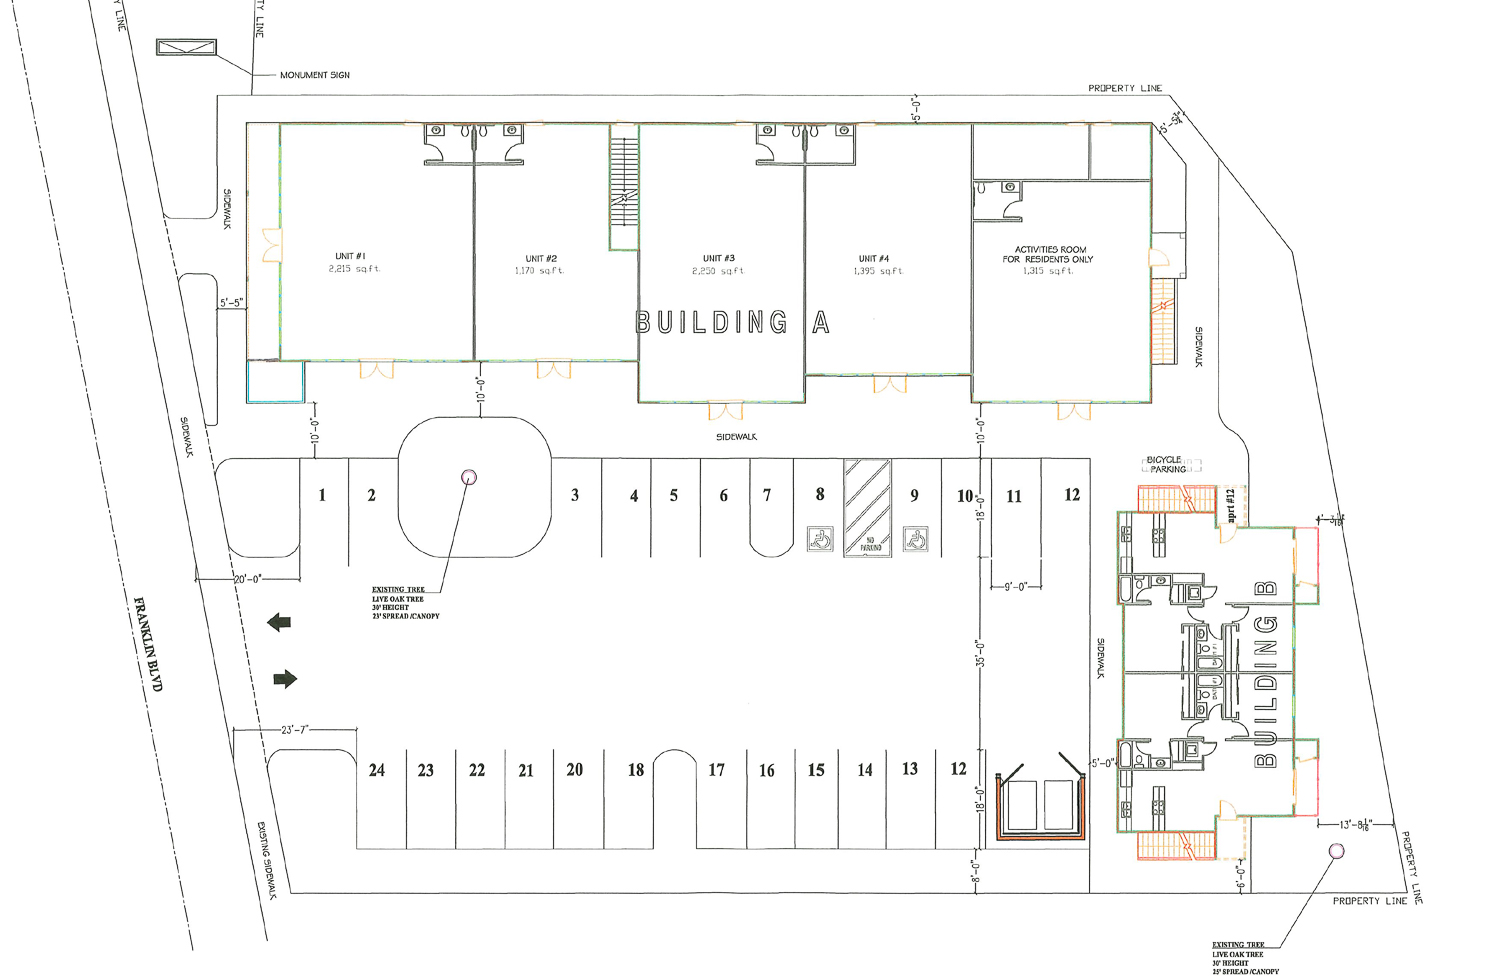 3935 Franklin Boulevard, site map by California Design Group